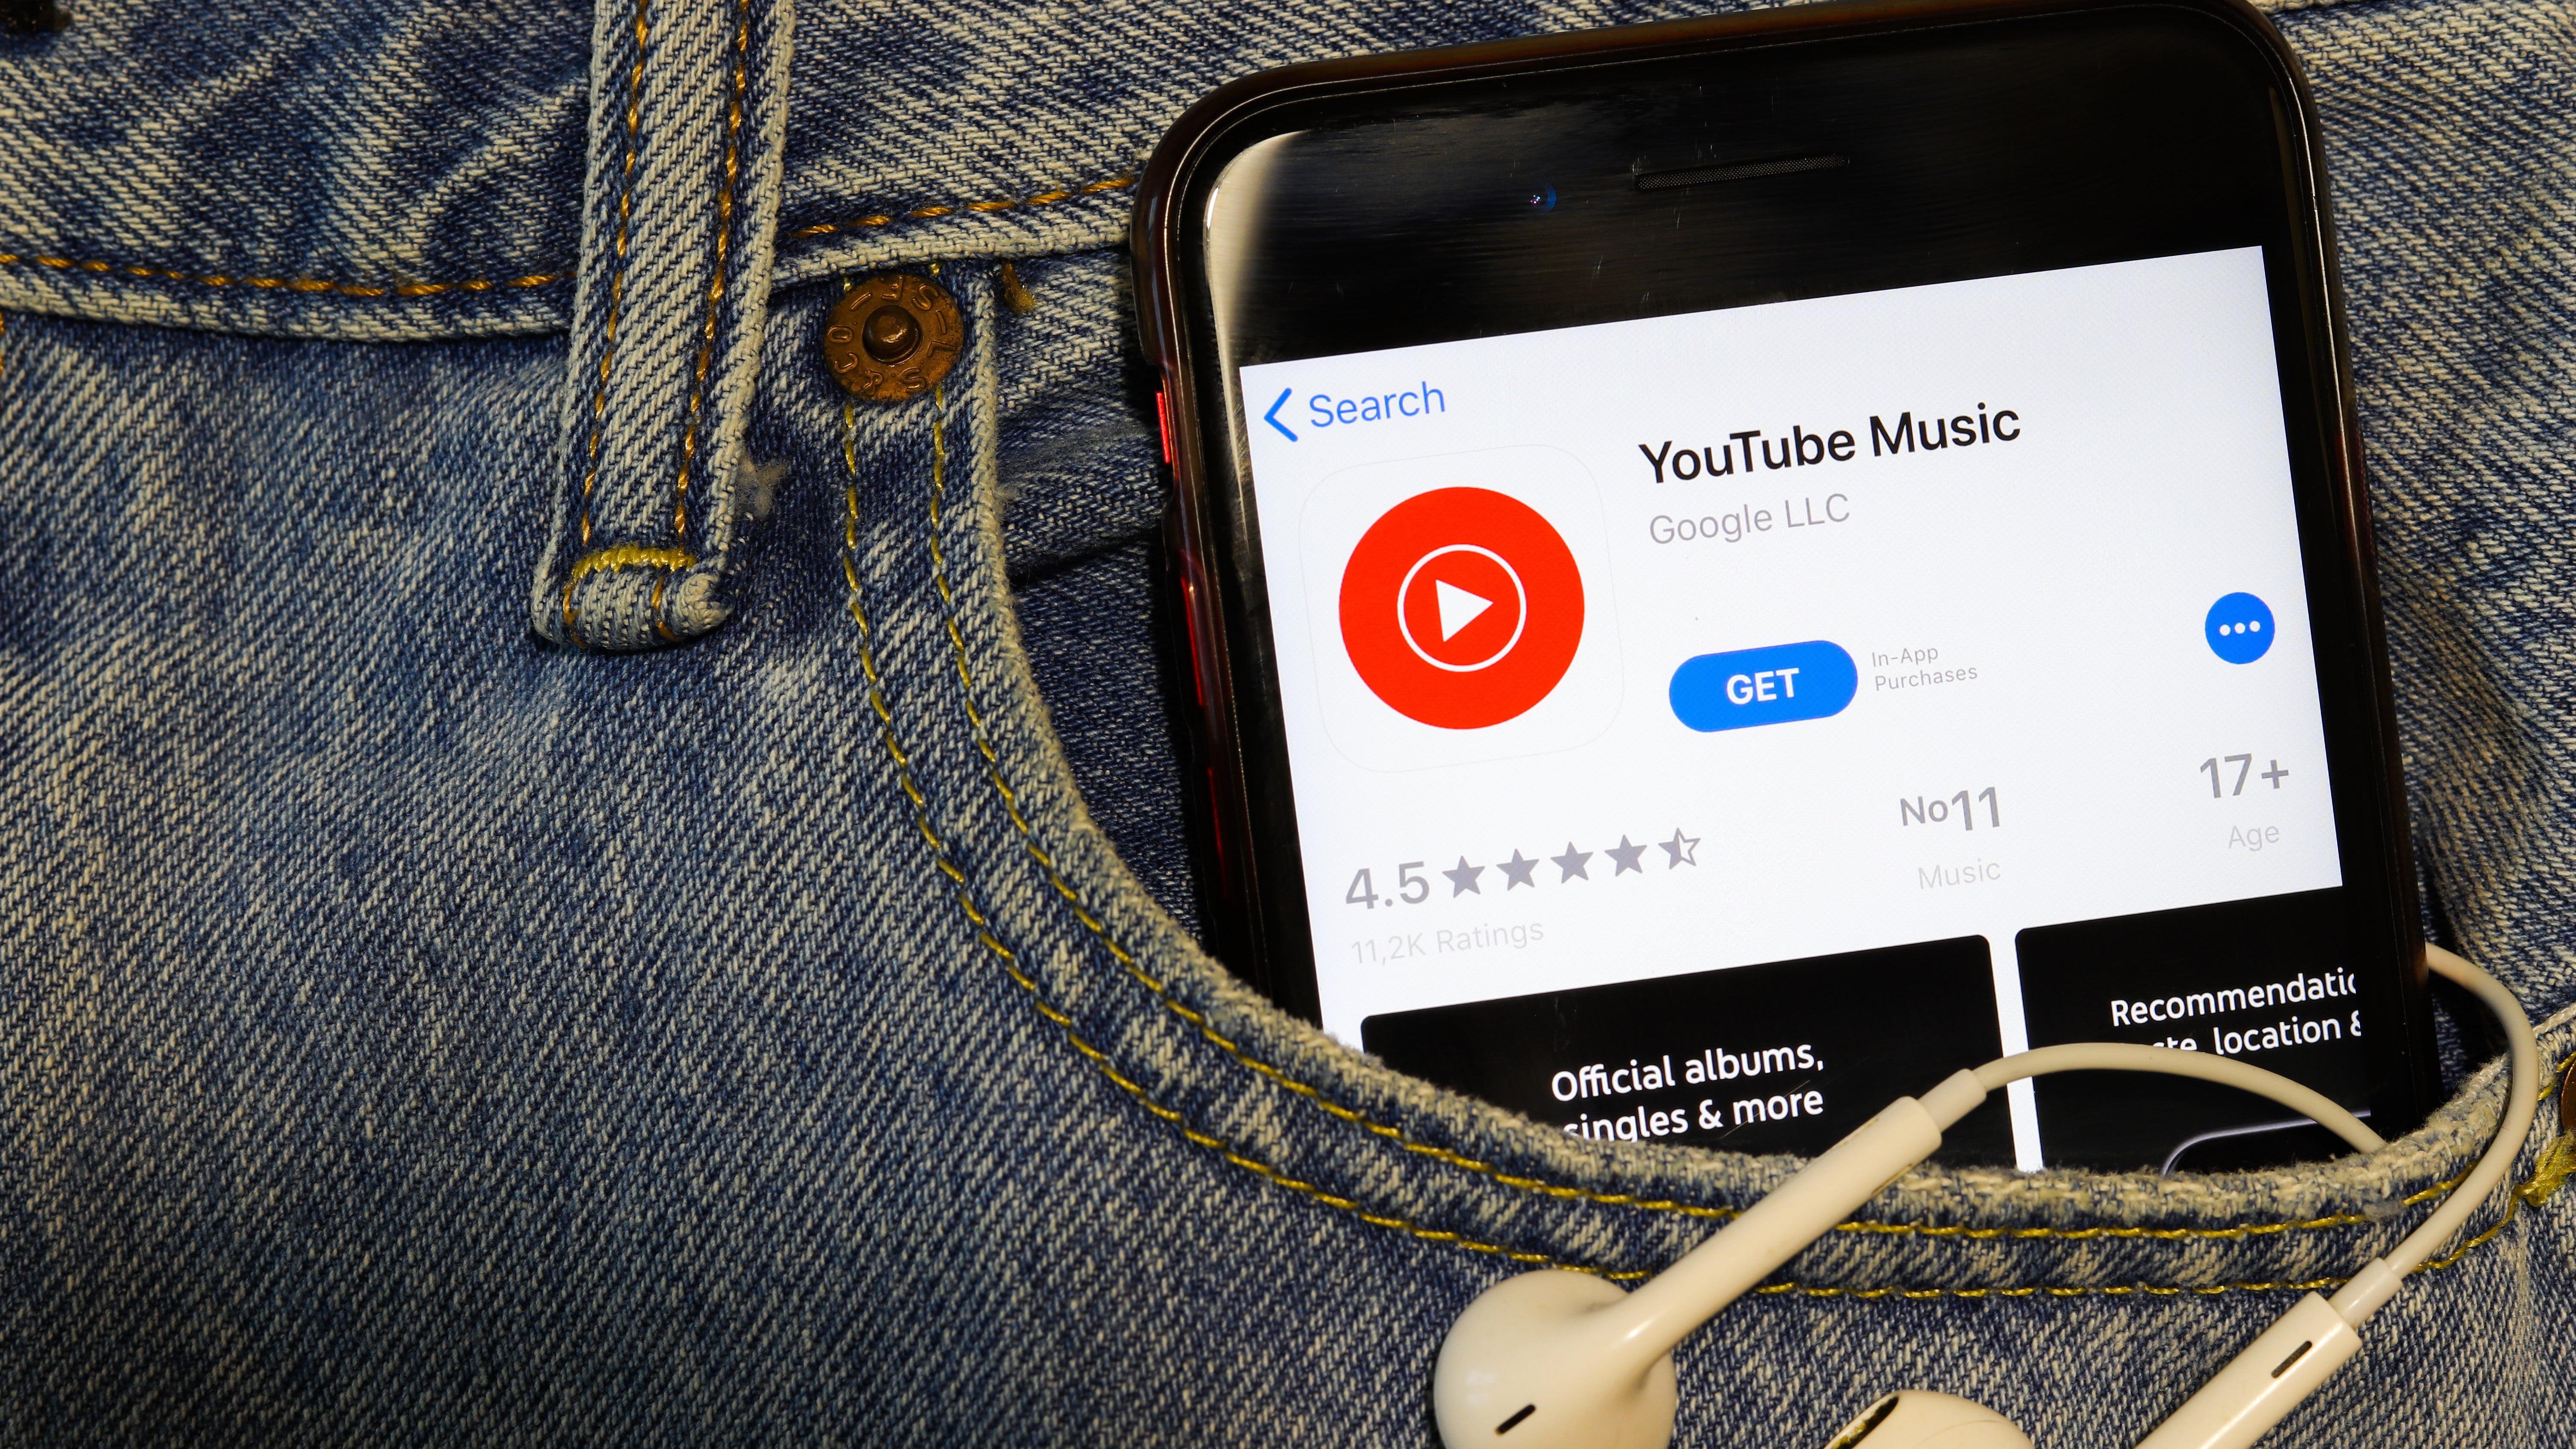 How To Transfer Your Music From Google Play To YouTube